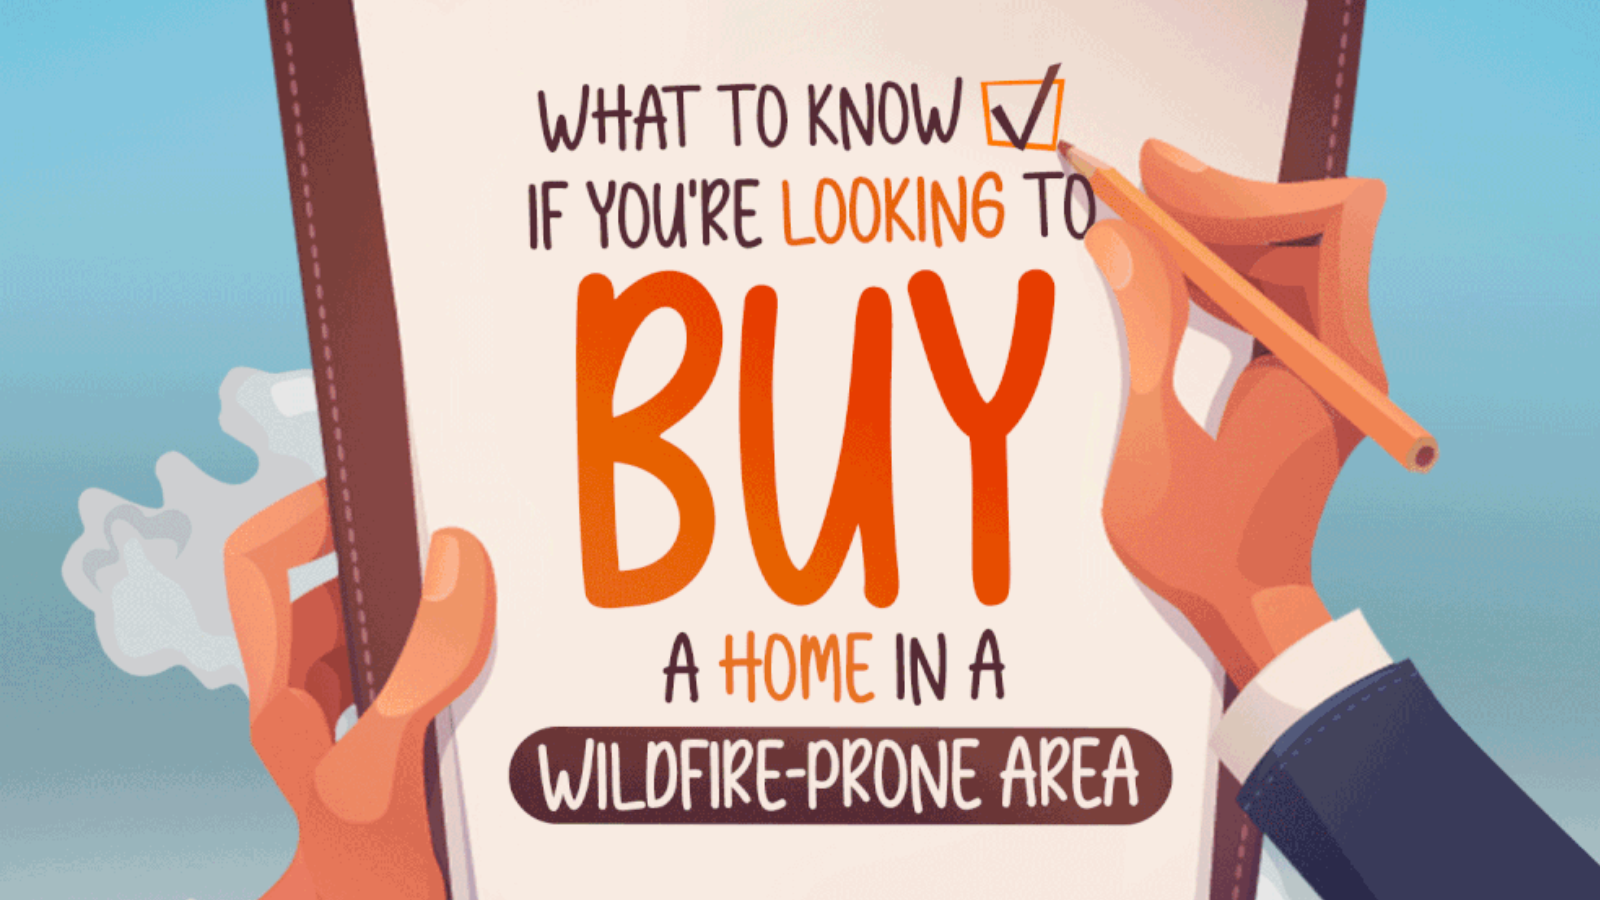 What To Know If You're Looking To Buy A Home in a Wildfire-Prone Area